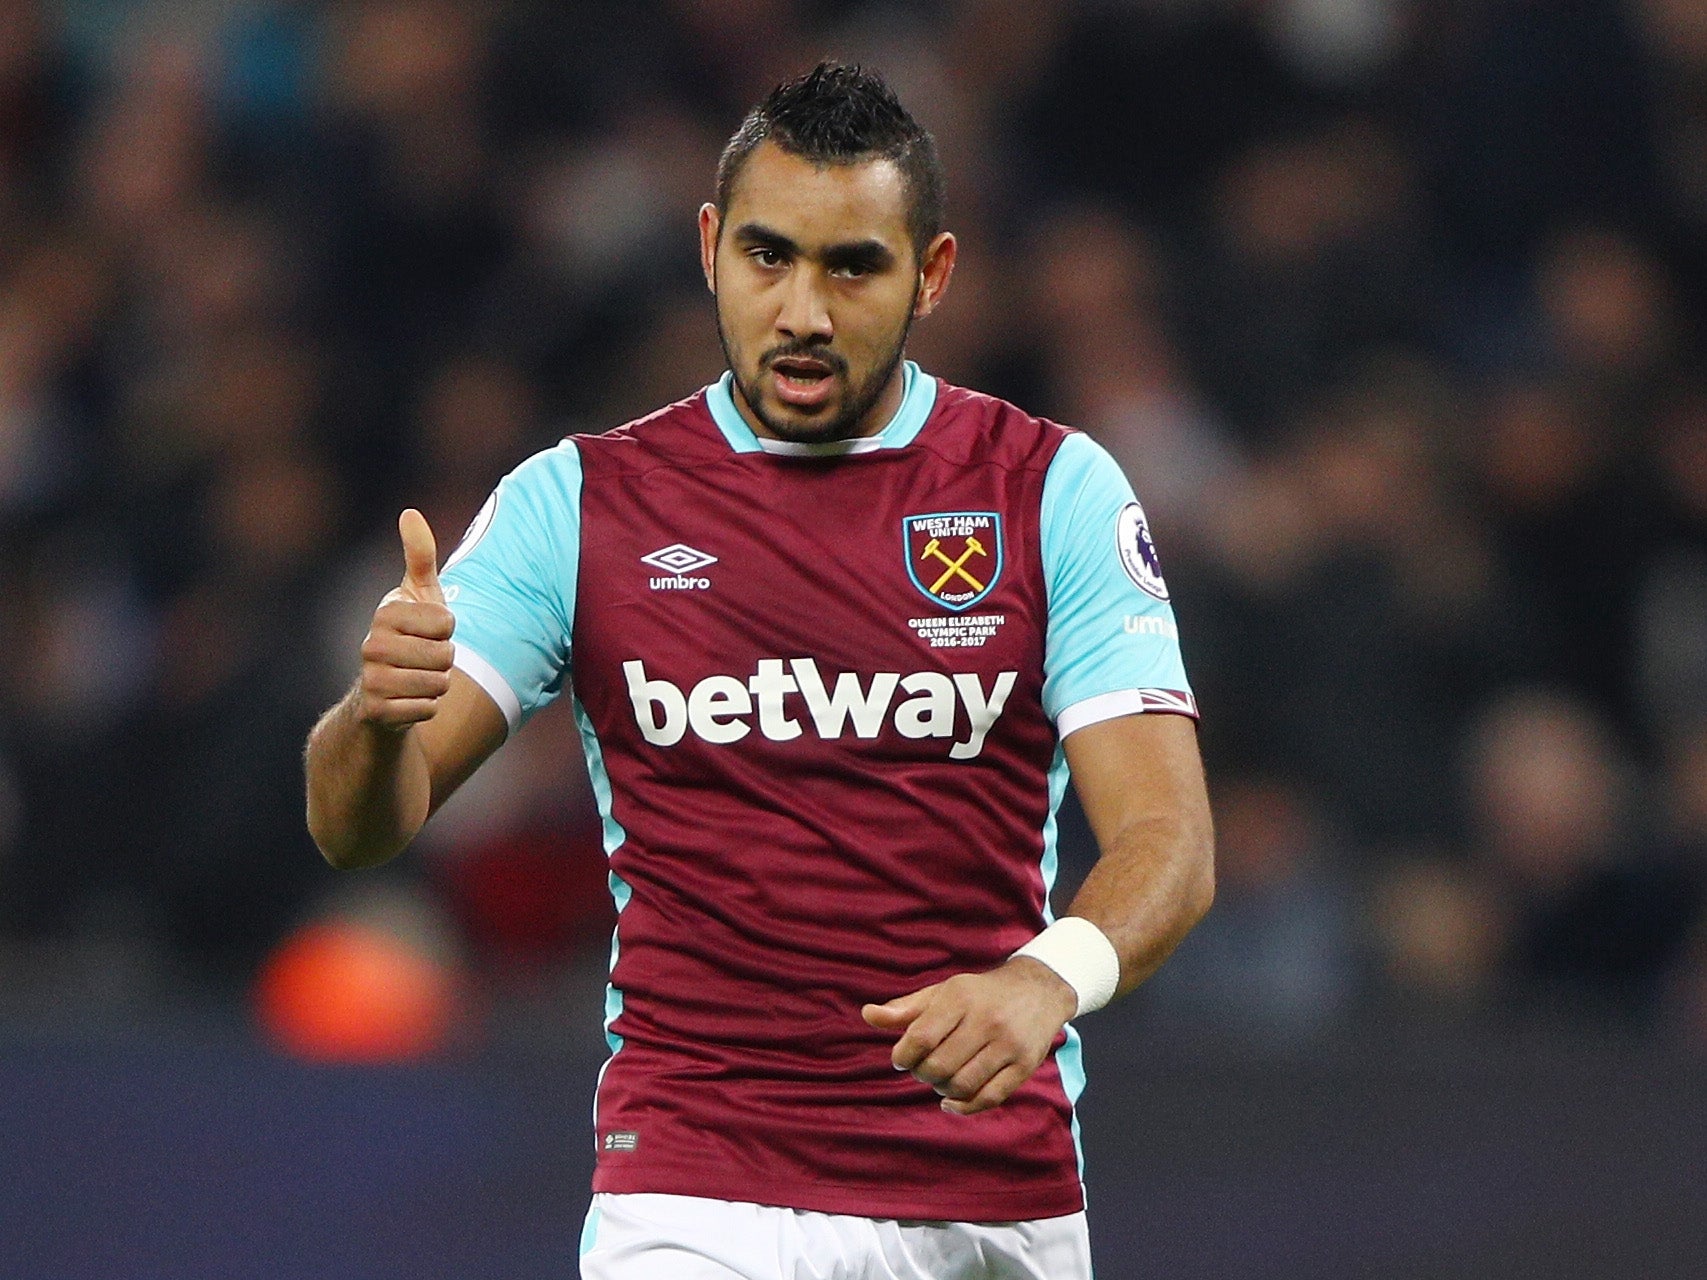 Payet signed a new deal at the club last February